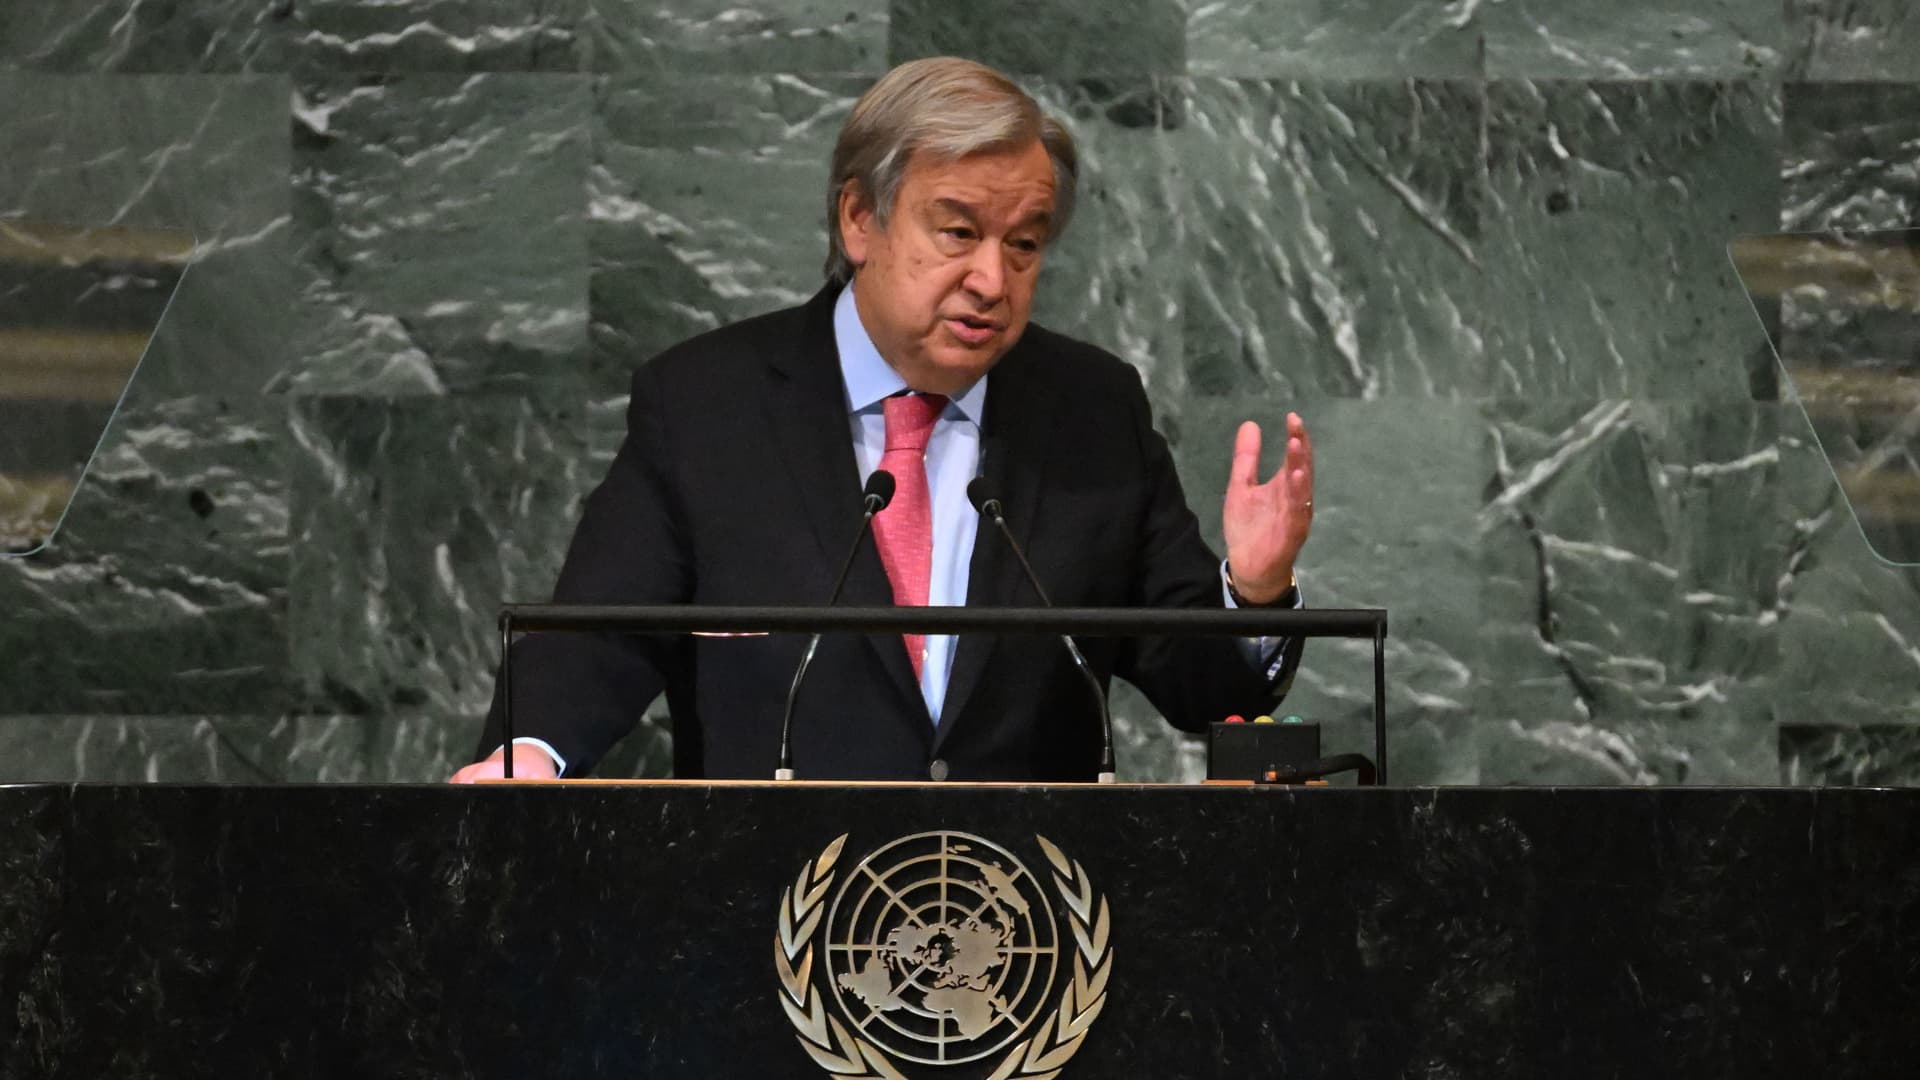 'Our world is in peril,' UN chief says in opening General Assembly address